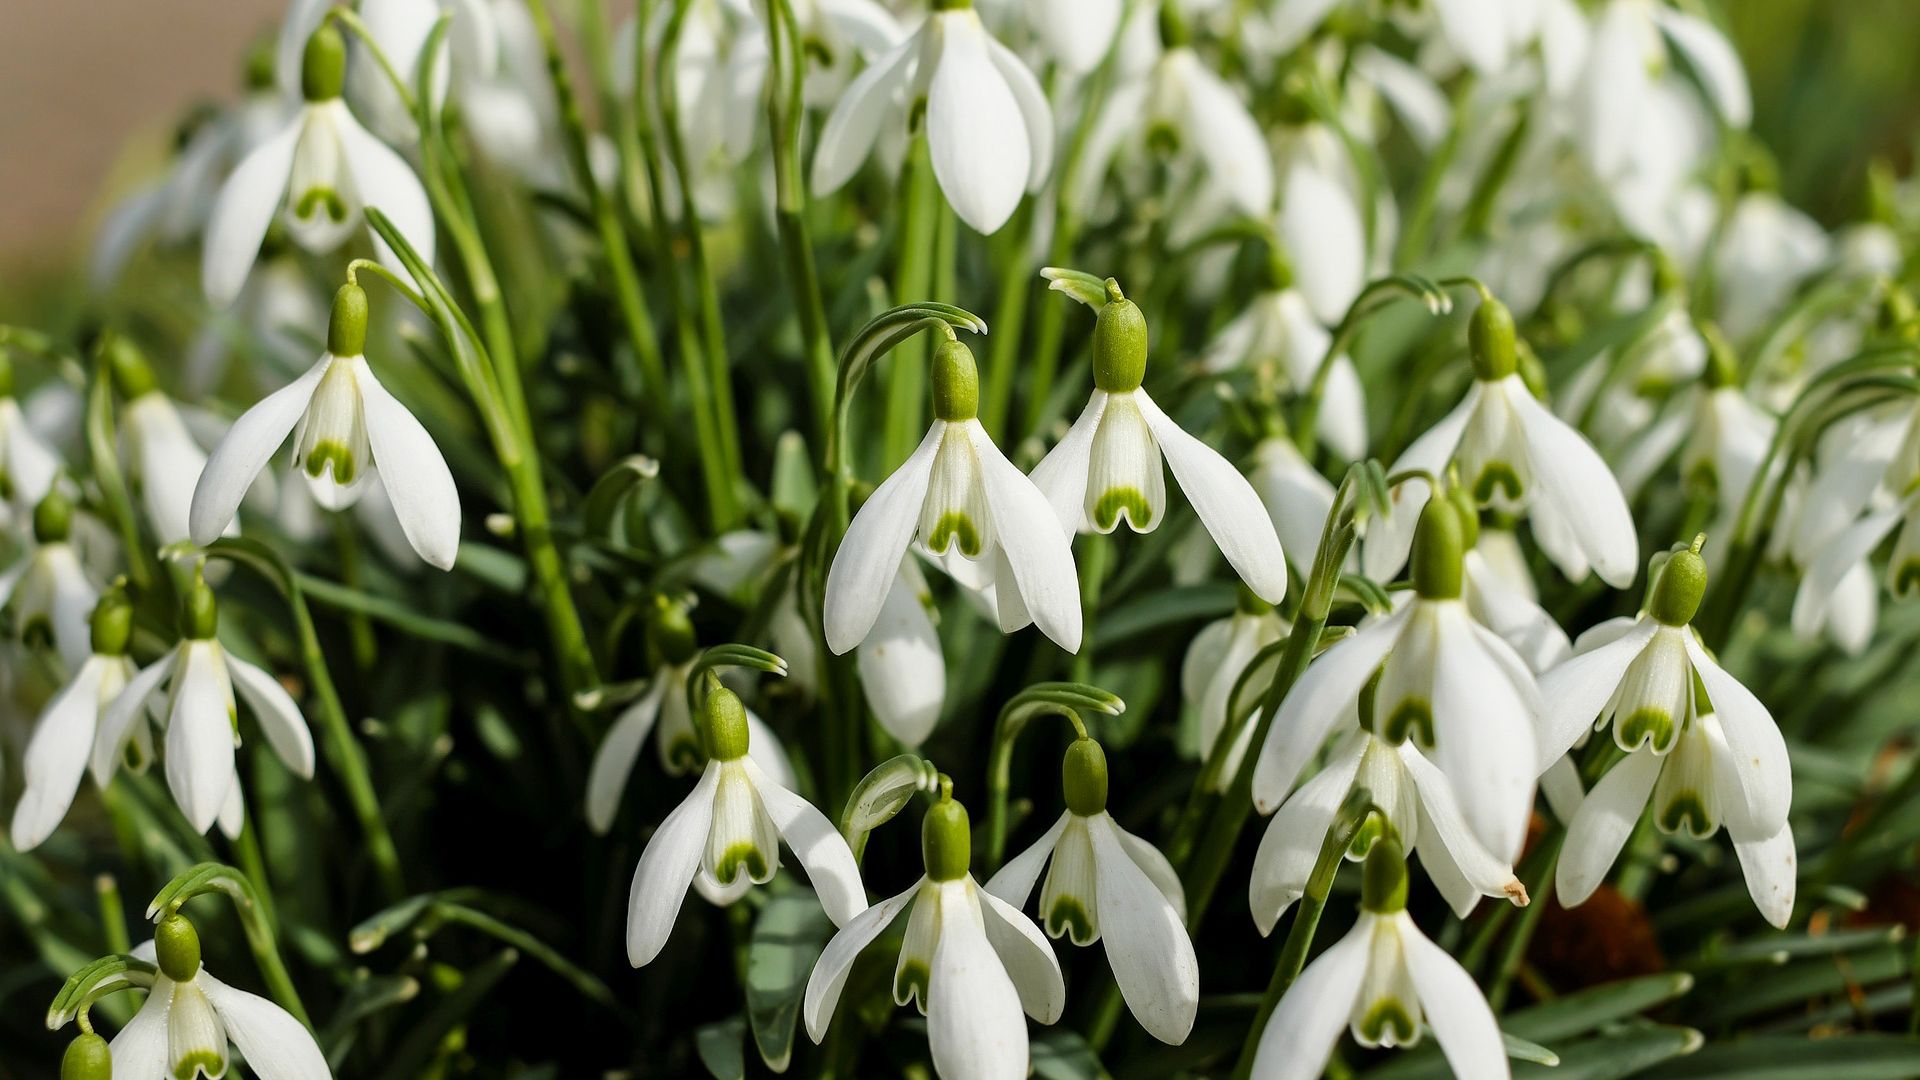 Desktop Wallpaper Snowdrop Plants, White Flowers, Spring, Blossom, Hd  Image, Picture, Background, Mbskwe